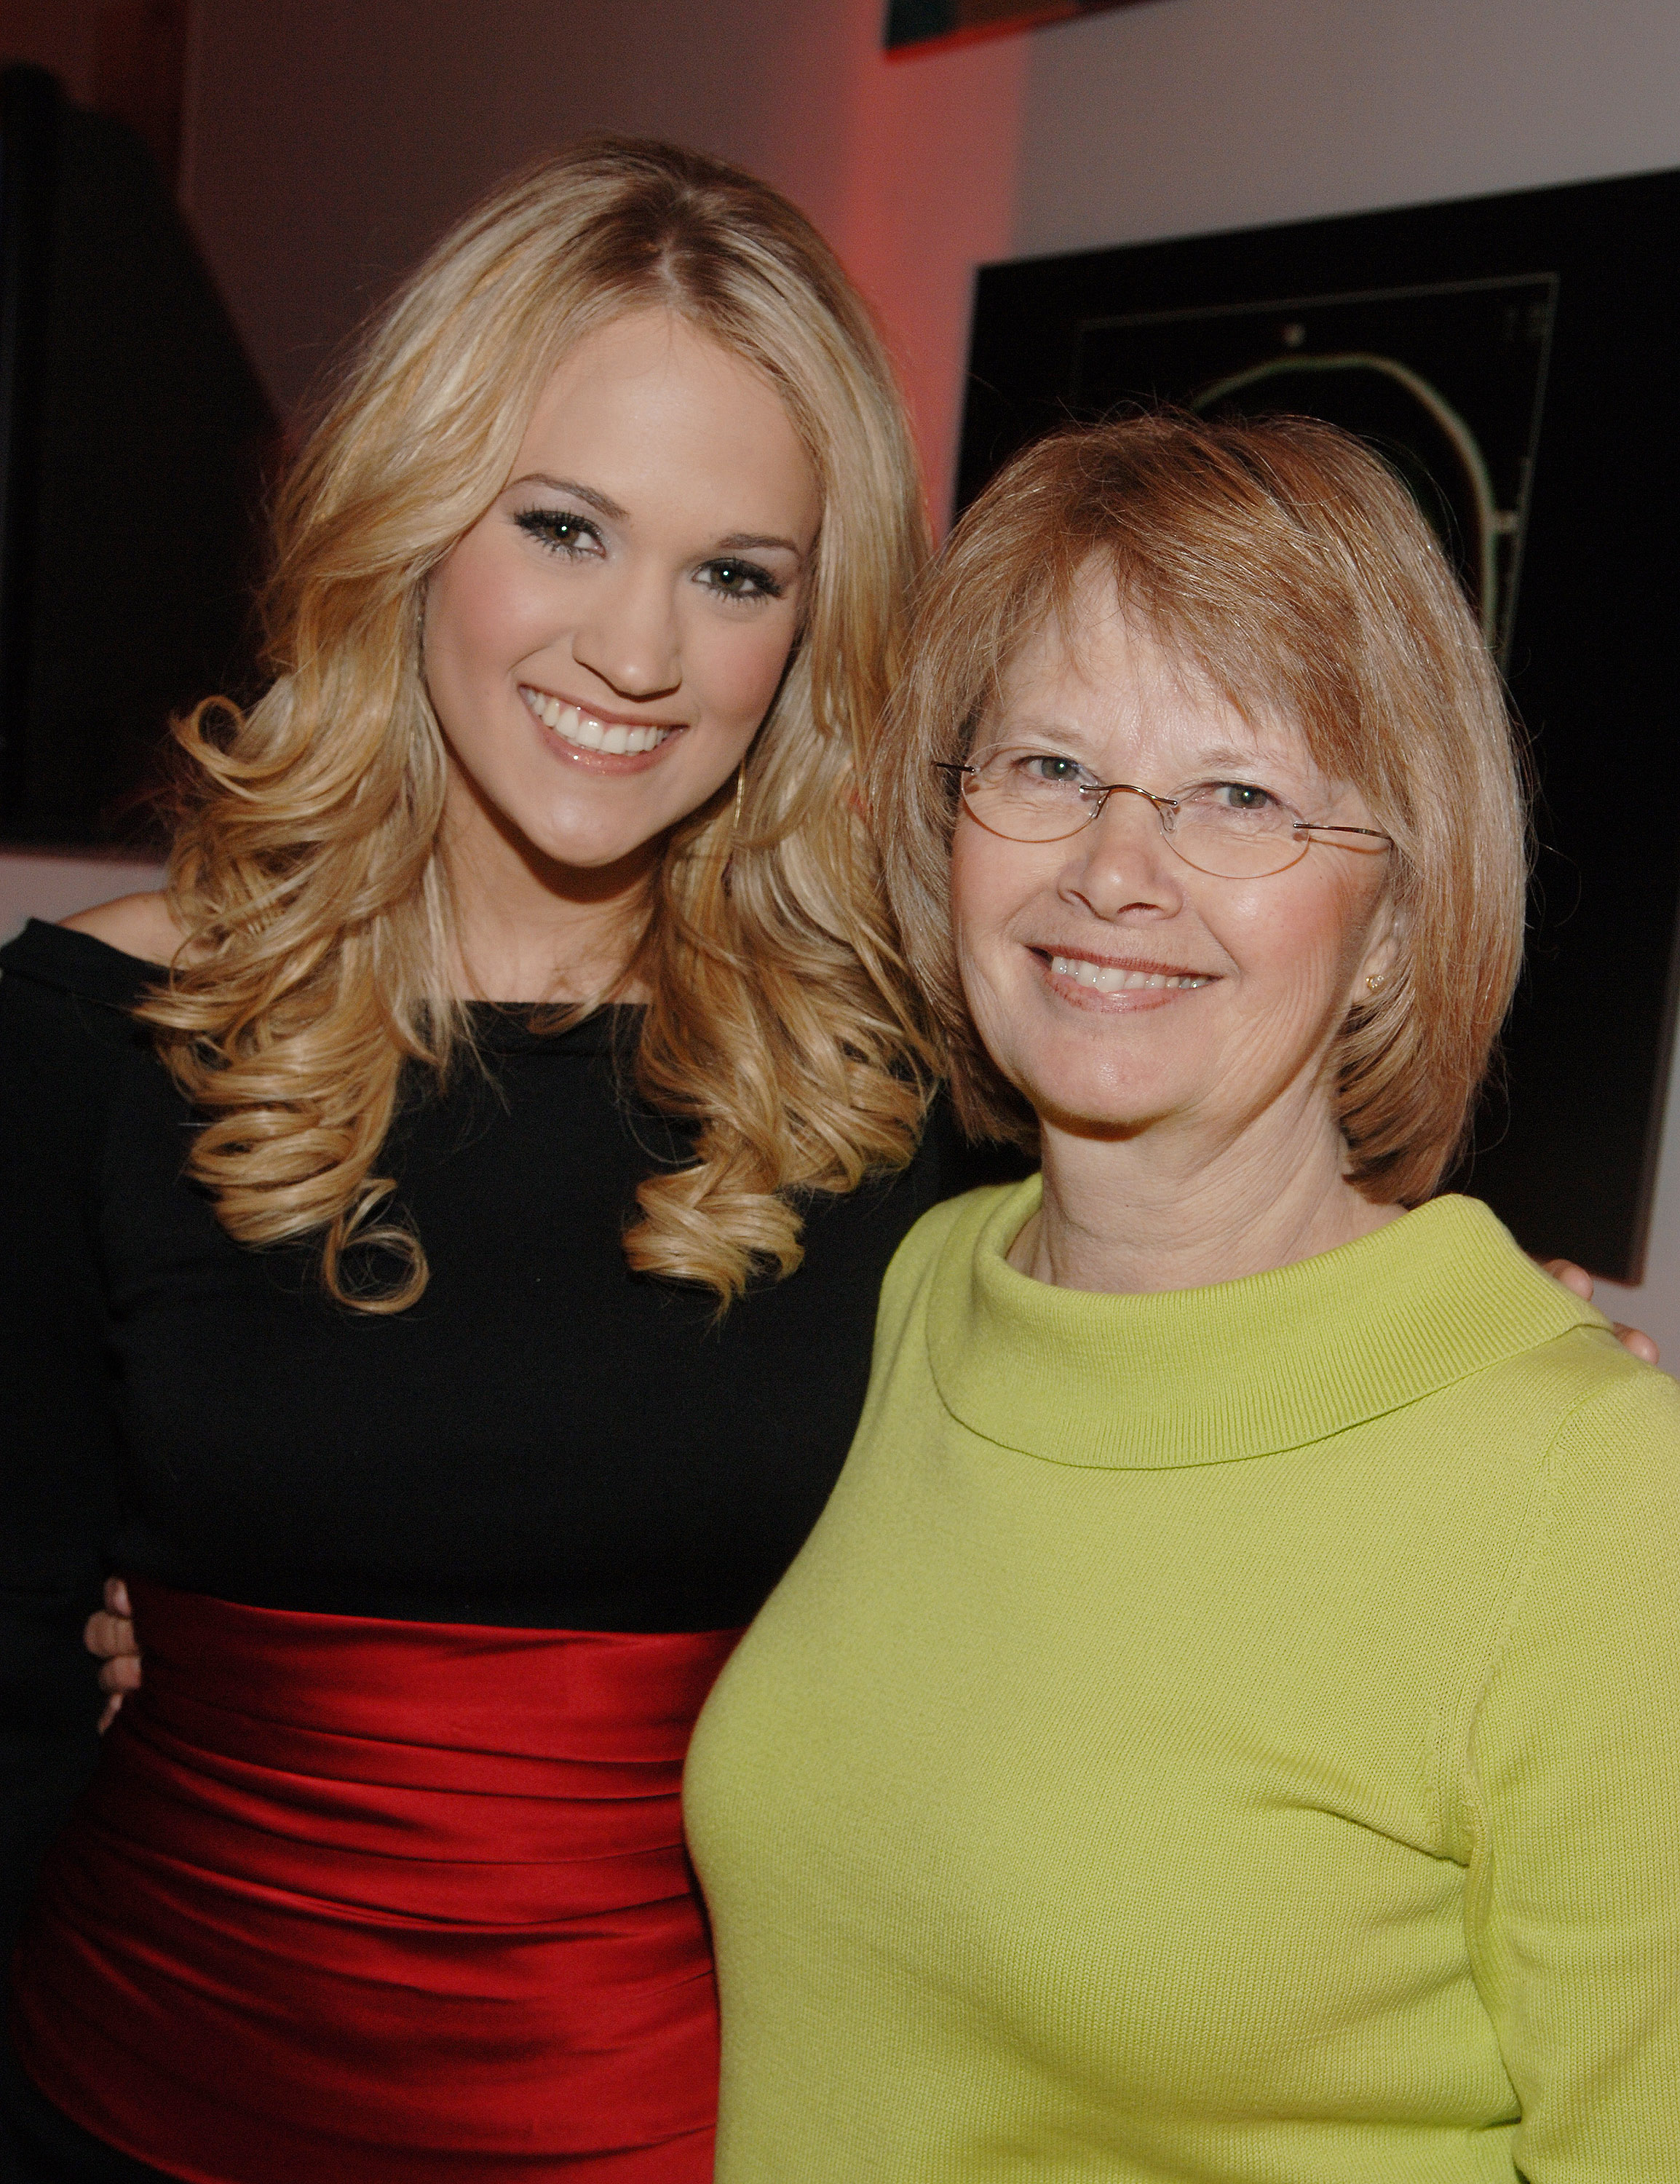 Carrie and Carole Underwood at the 39th Annual CMA Awards in 2005 | Source: Getty Images